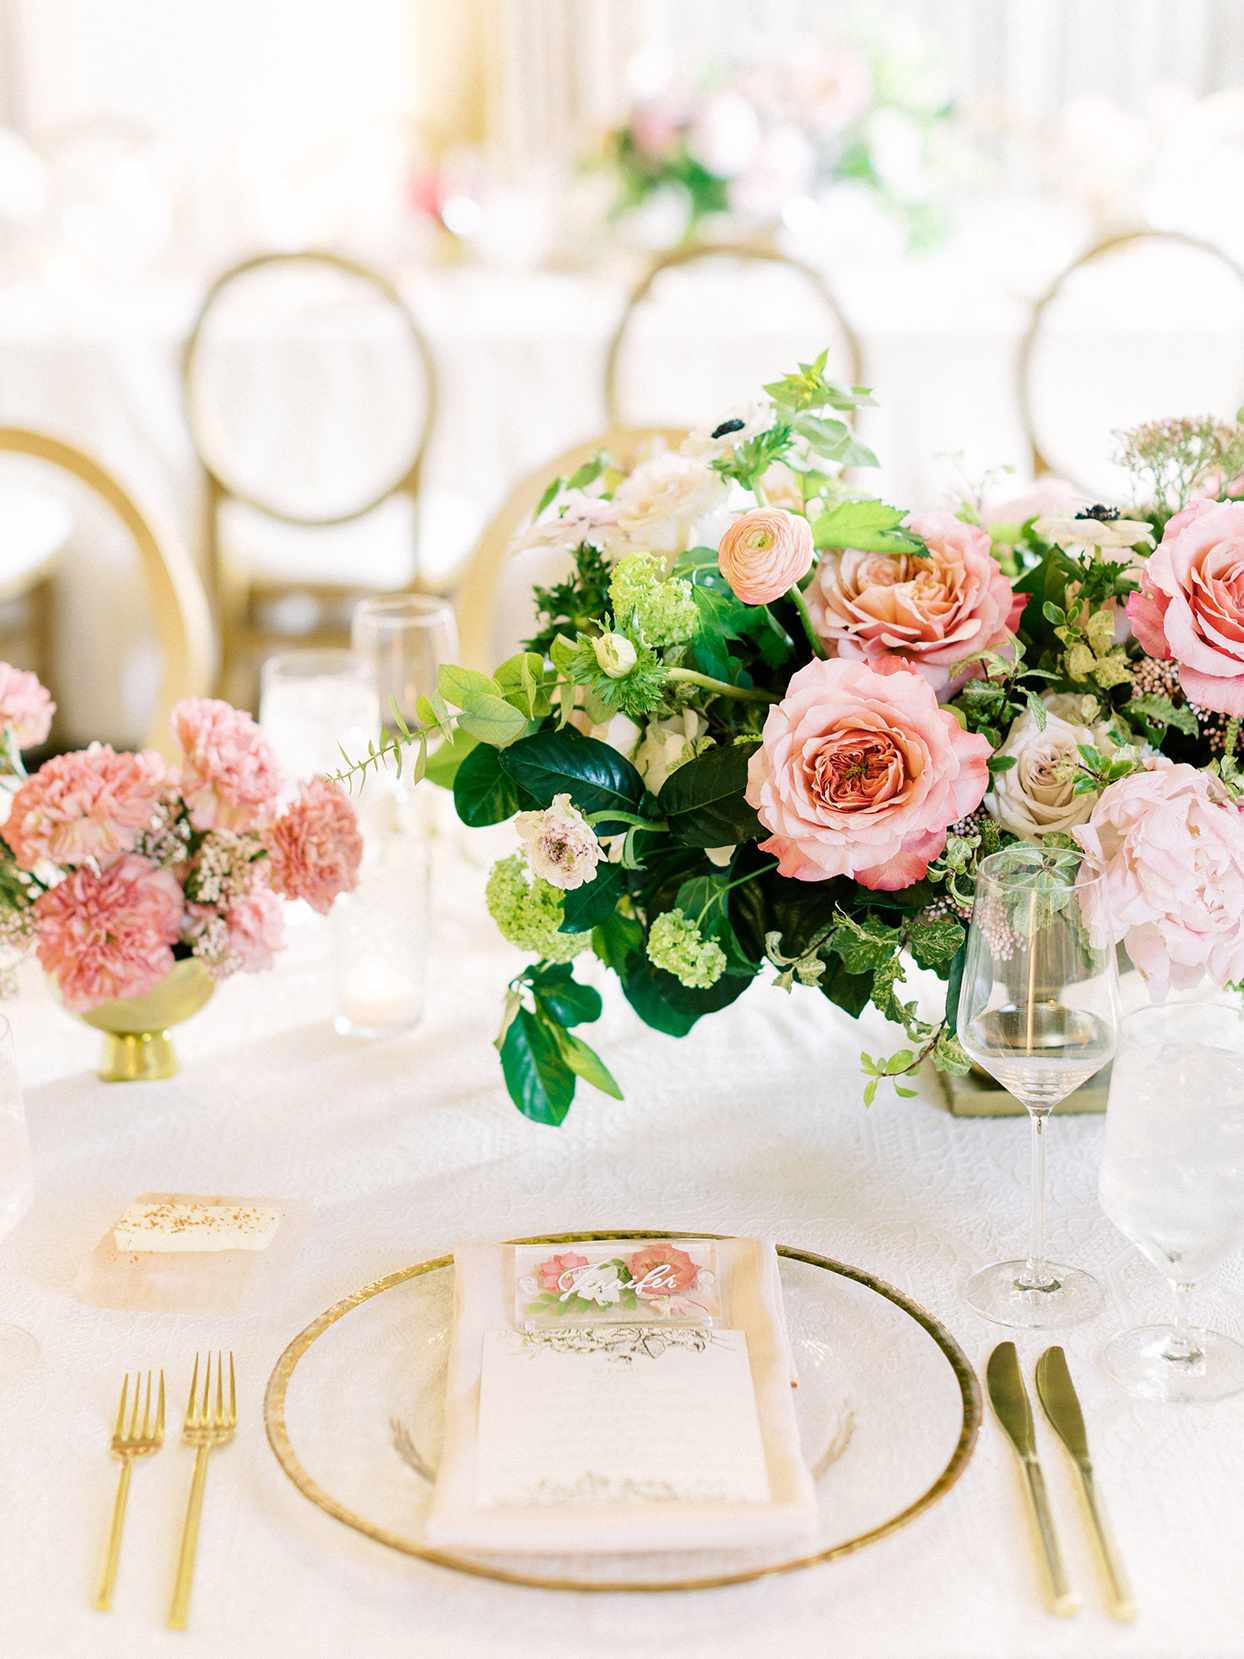 elegant reception place setting with golden accents and pink floral arrangement